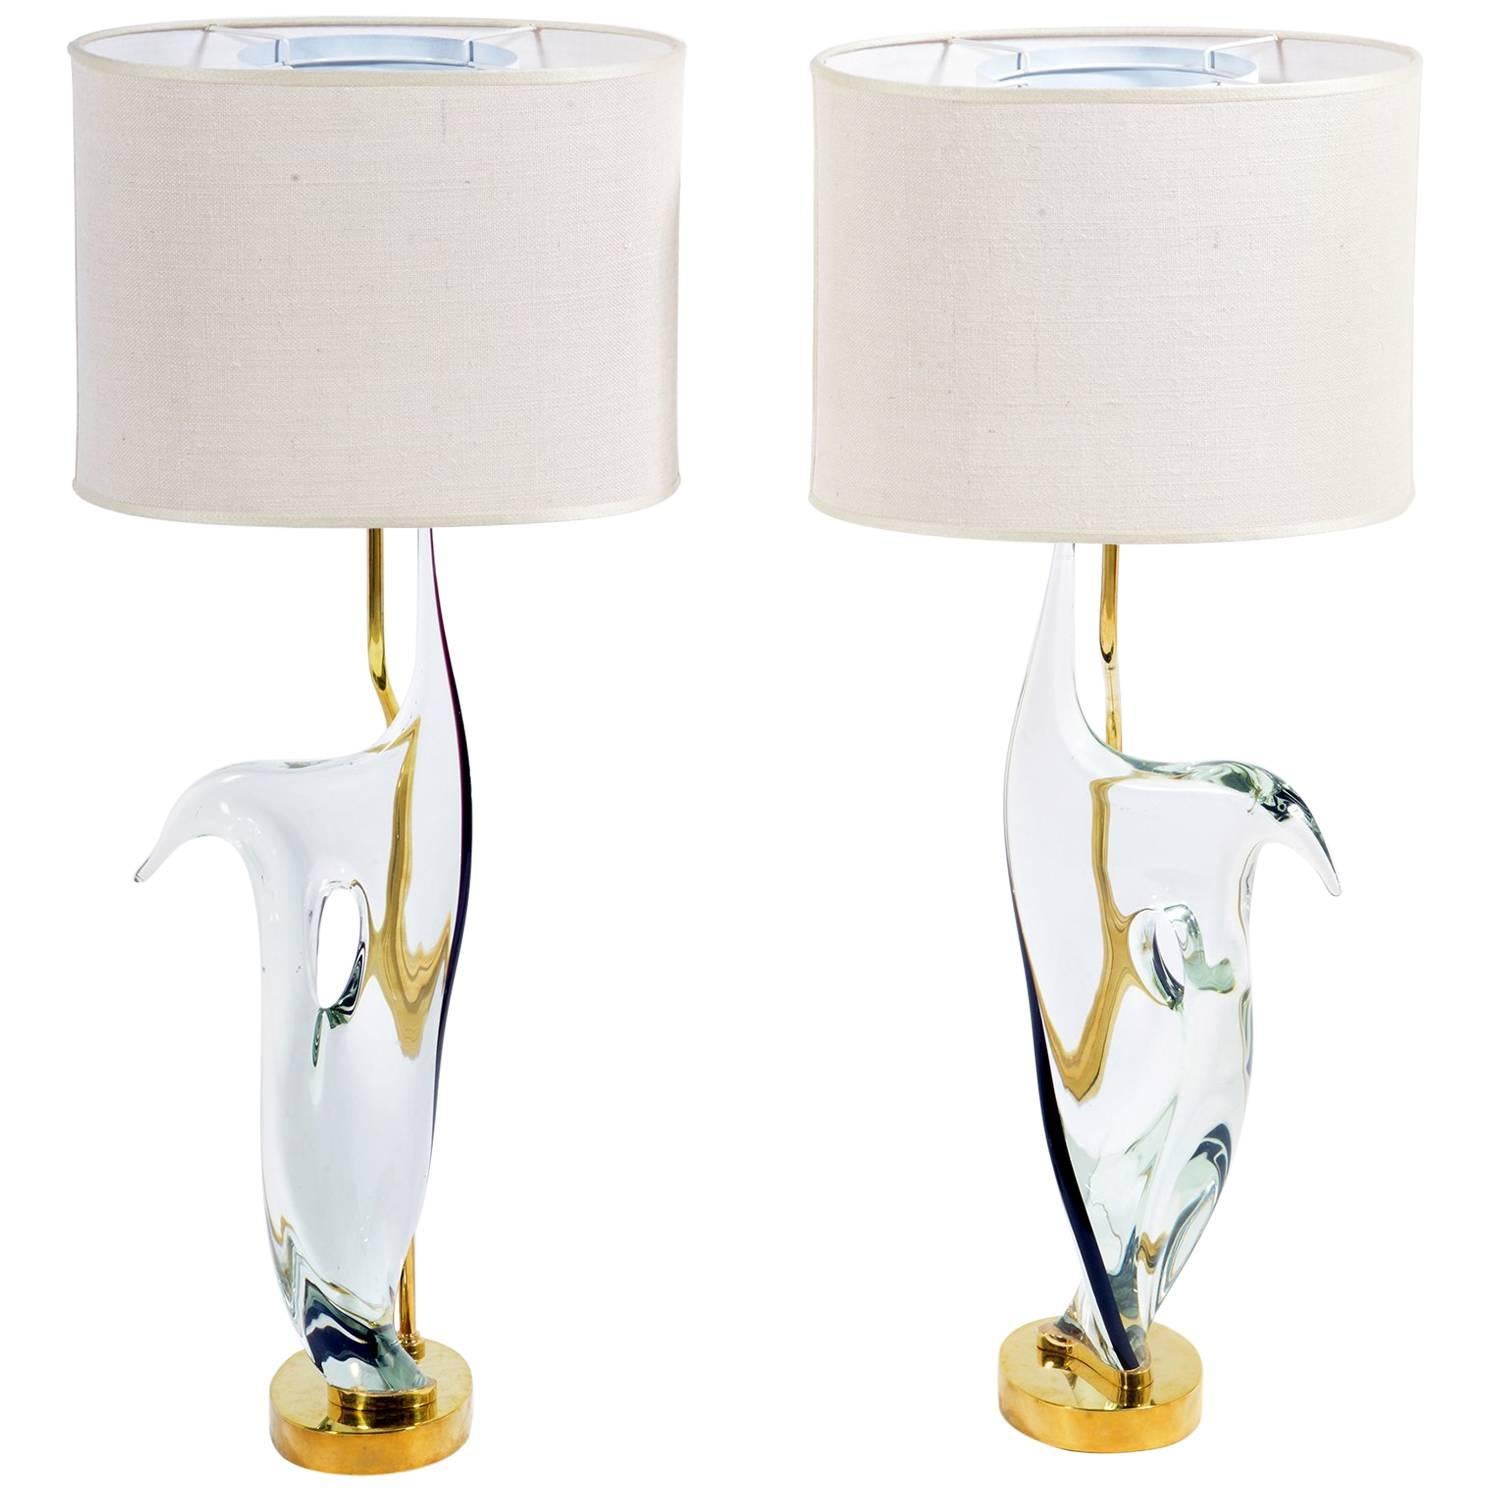 Midcentury Table Lamps Transparent Murano Glass and Brass by Cenedese